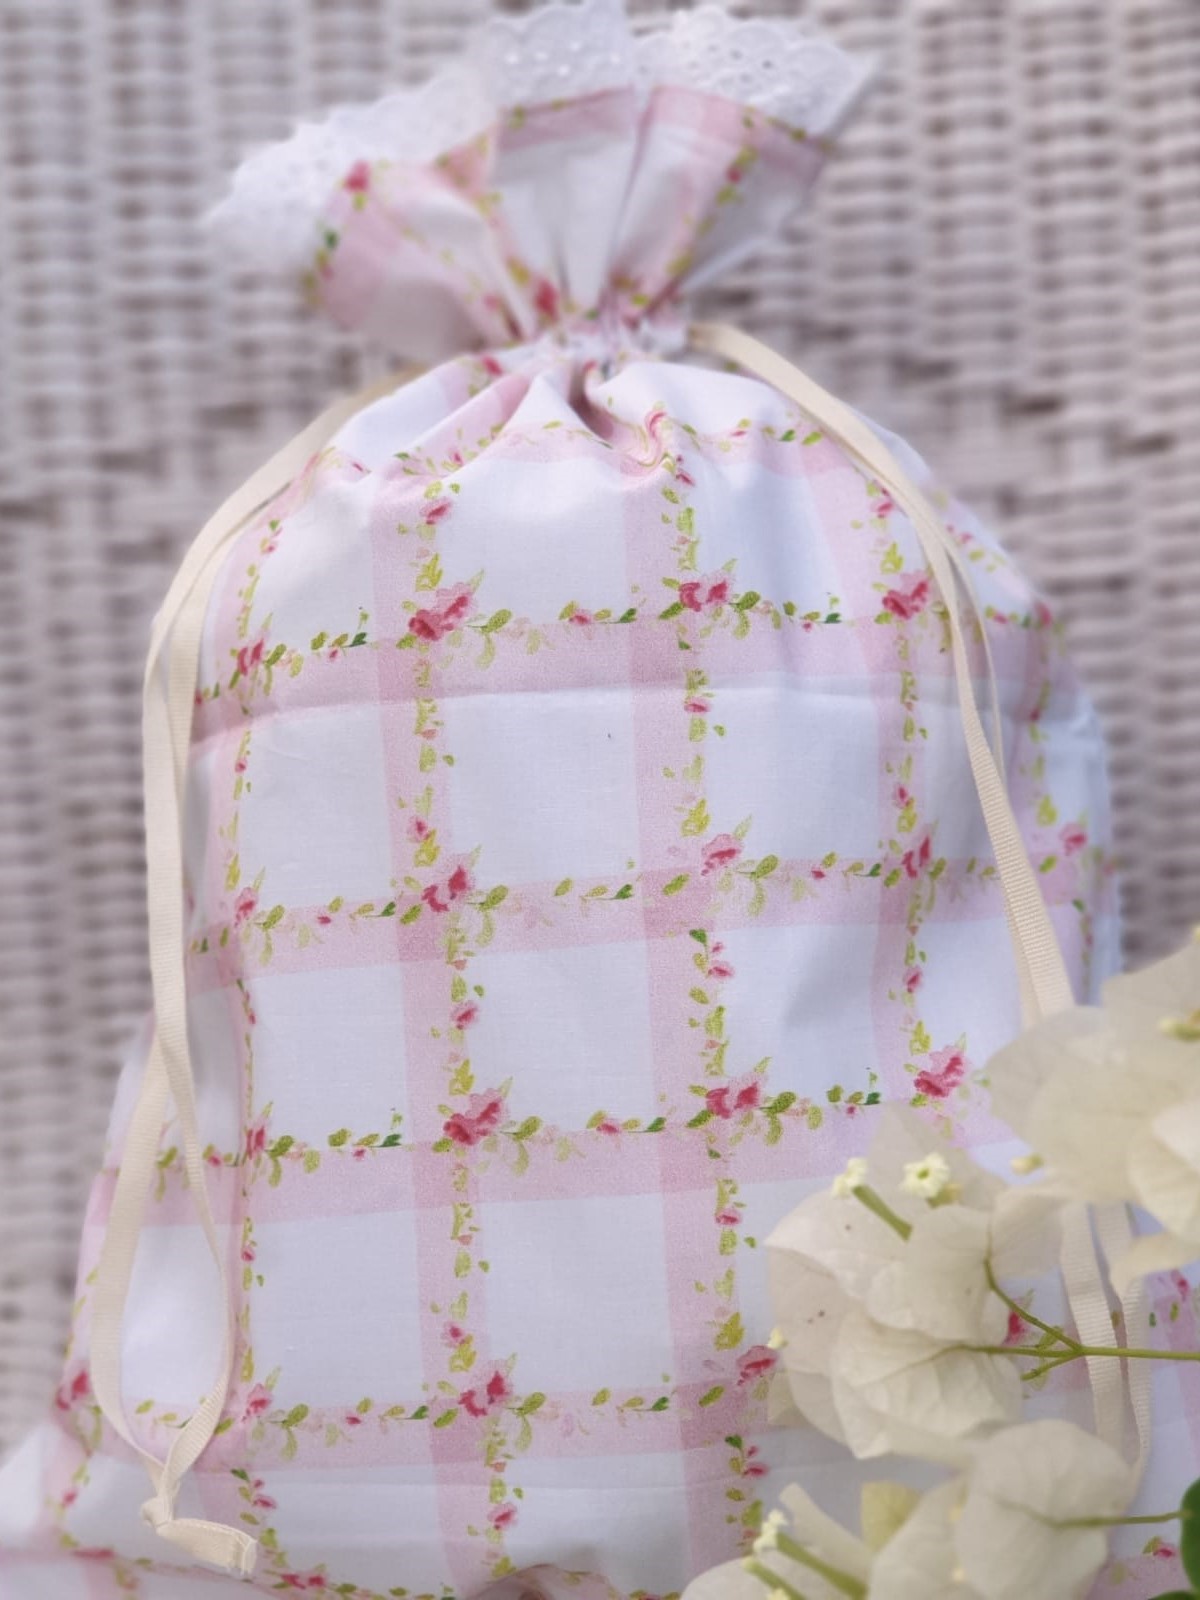 Drawstring Bag - Floral lattice print and lace themed